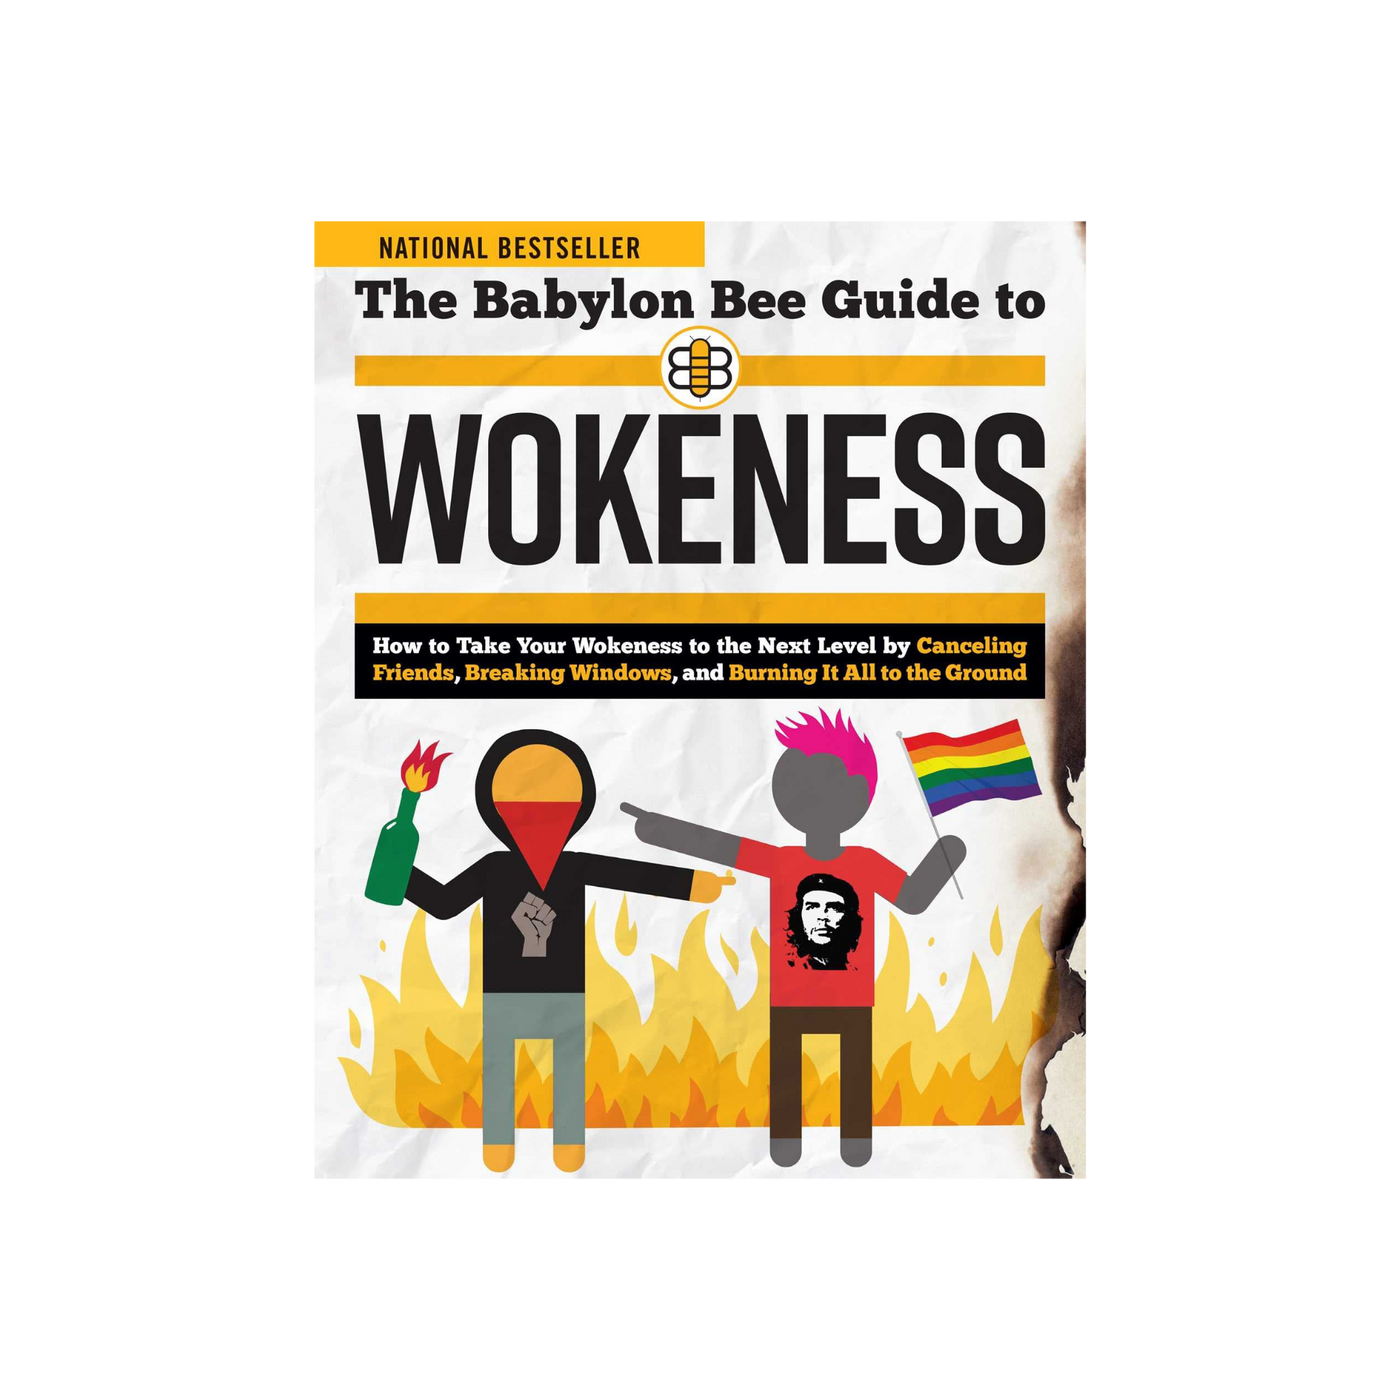 The Babylon Bee Guide to Wokeness by Babylon Bee